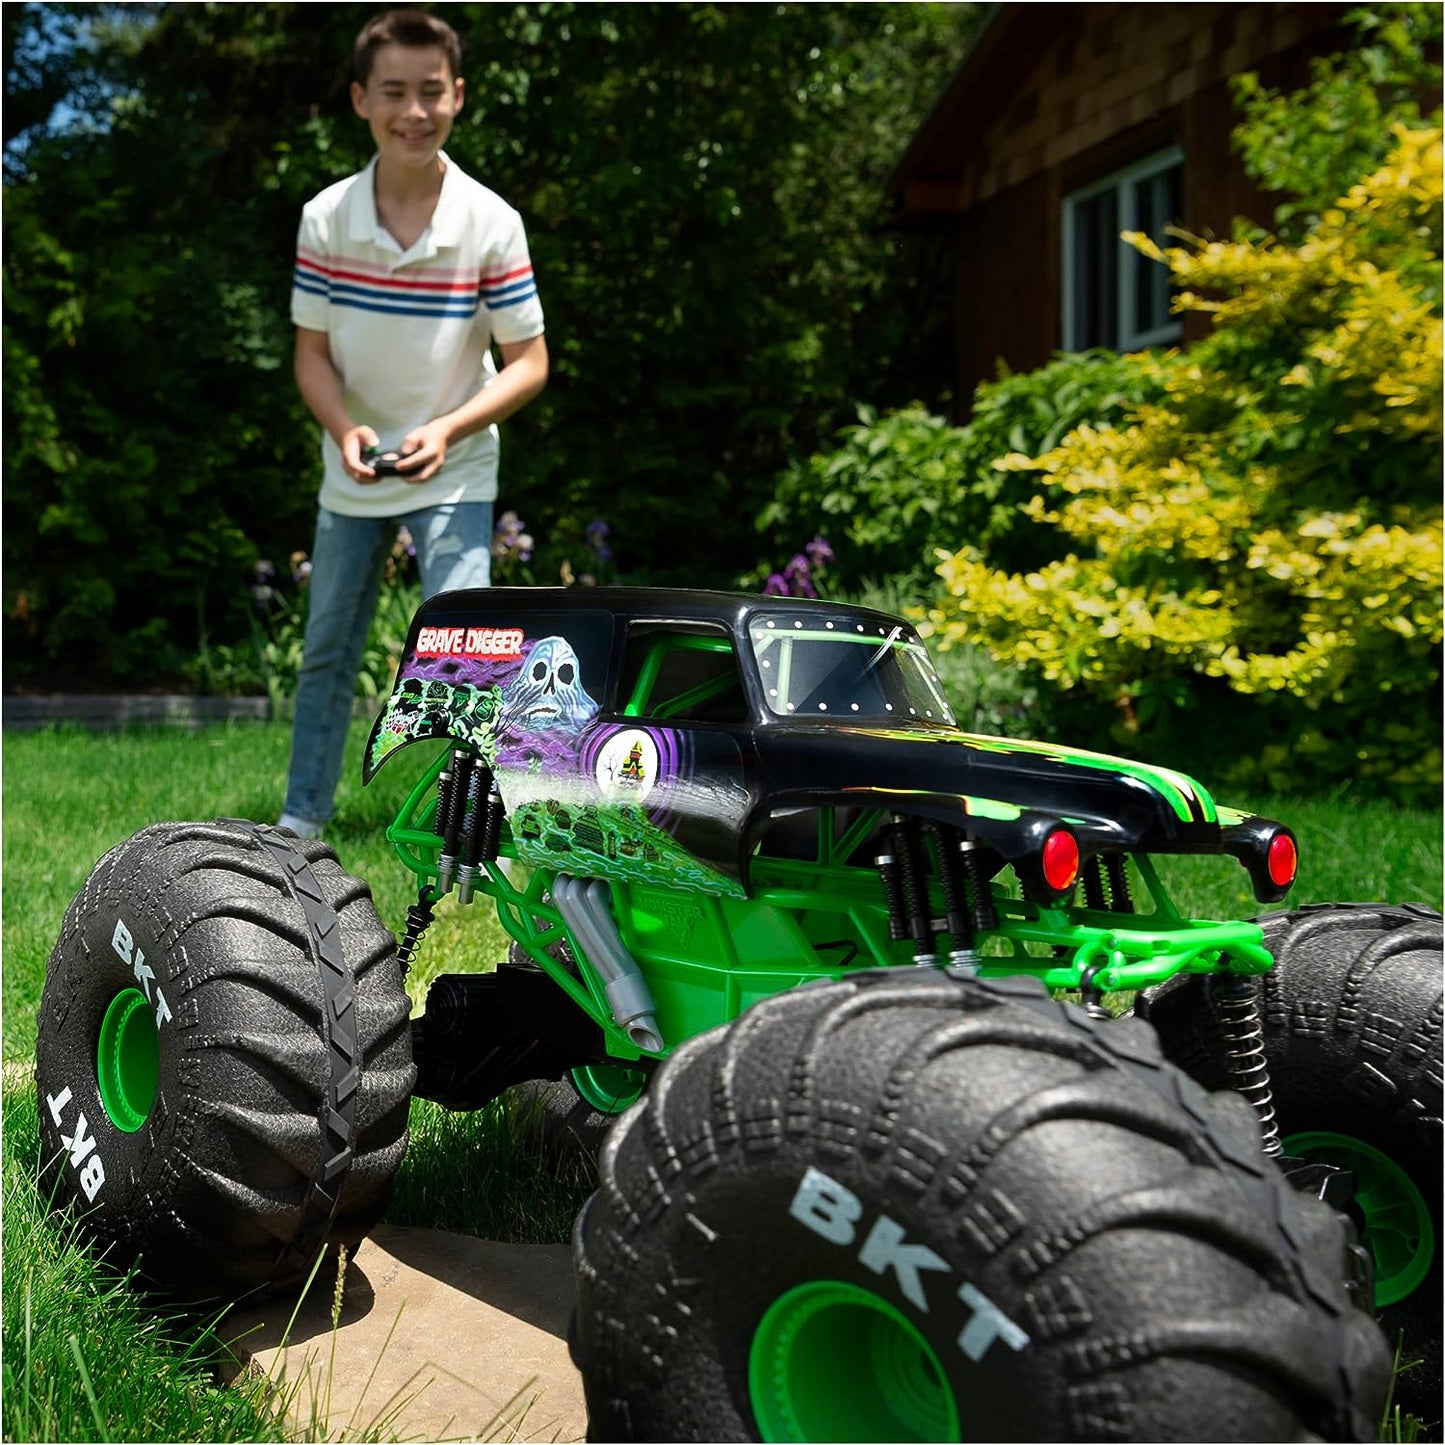 All-Terrain Remote Control Monster Truck - RC Monster Truck - RC vehicle